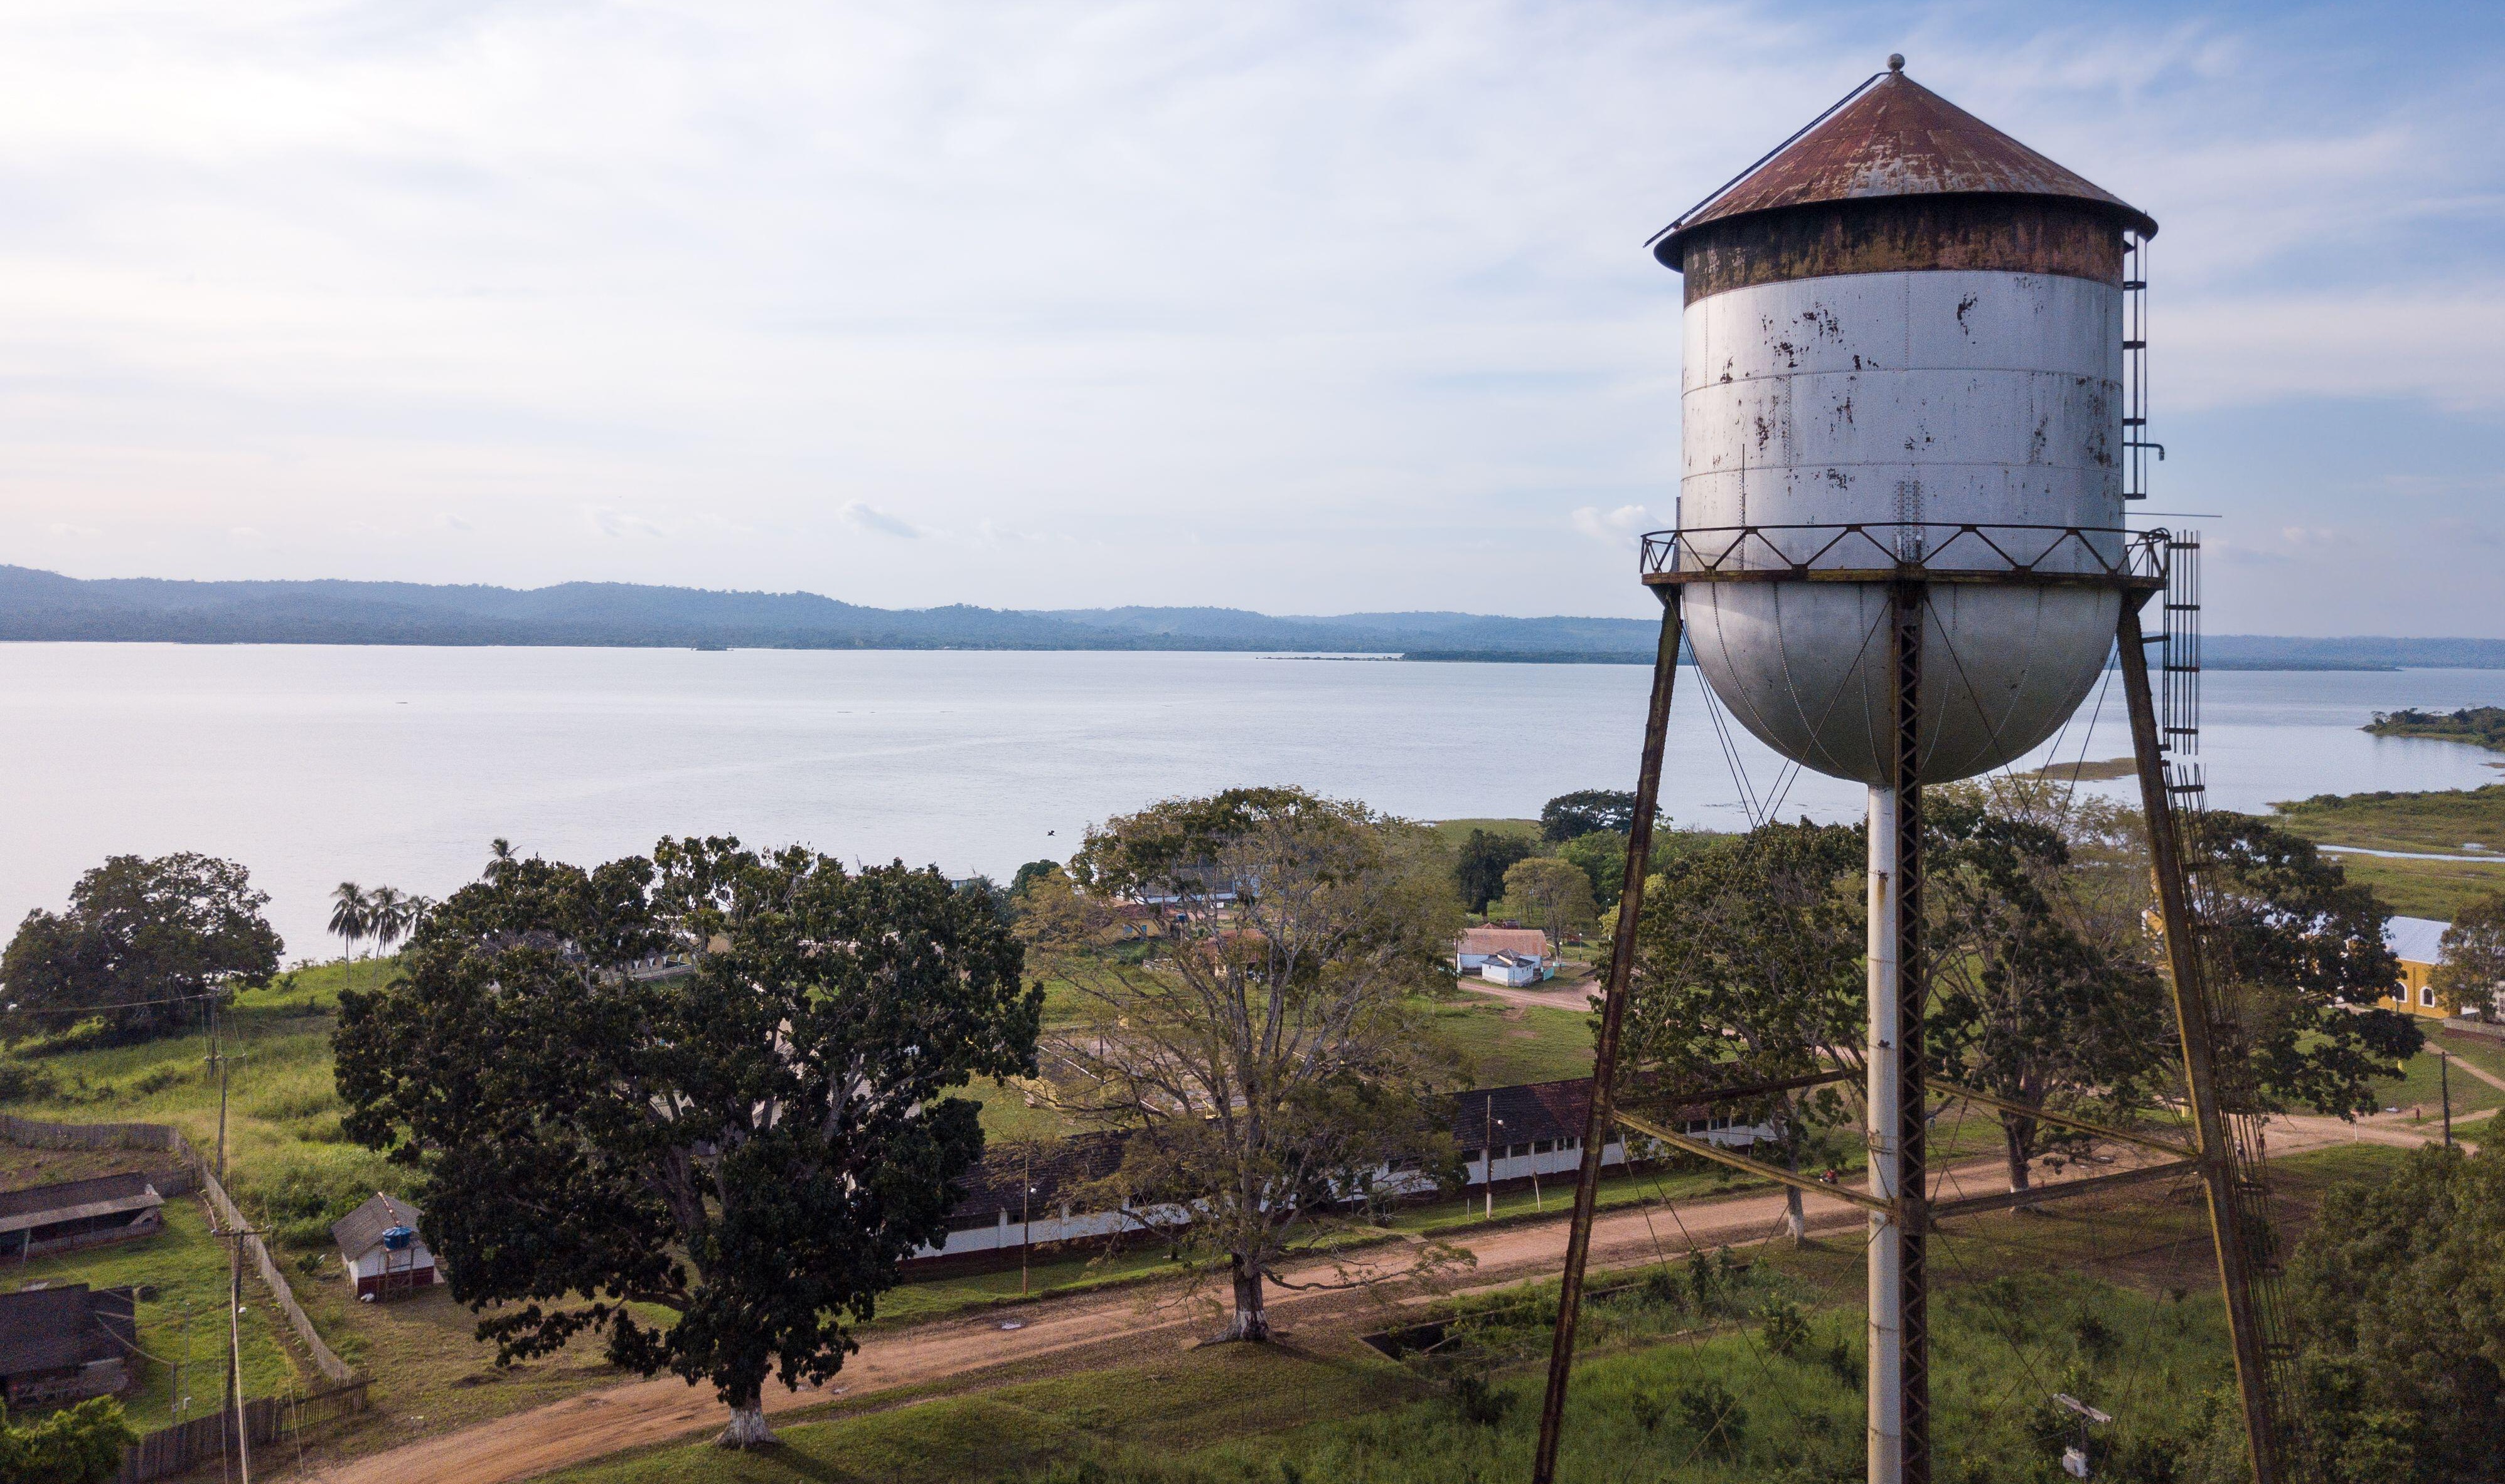 The big attraction of the place was it's tall water tower that overlooked the city and the lake nearby.